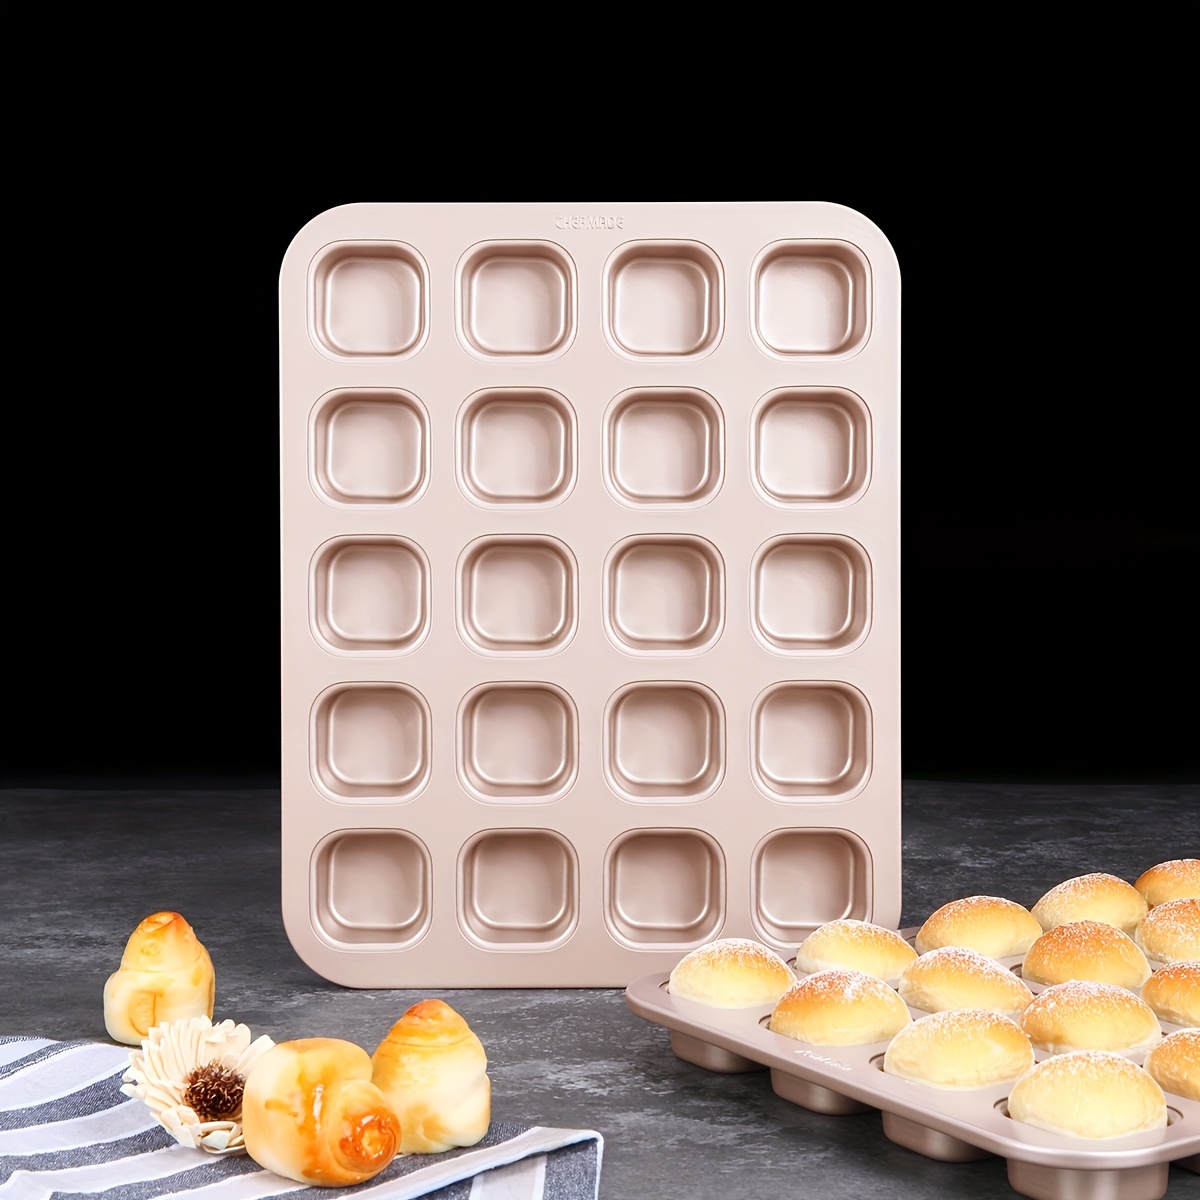 HOMSFOU 3pcs 6 Six Grid Silicone Bakeware Brownie Pan Mini Cupcake Pans 9x9  Baking Pan Silicone Brownie Molds Smore Molds Baking Pan with Lid Muffin